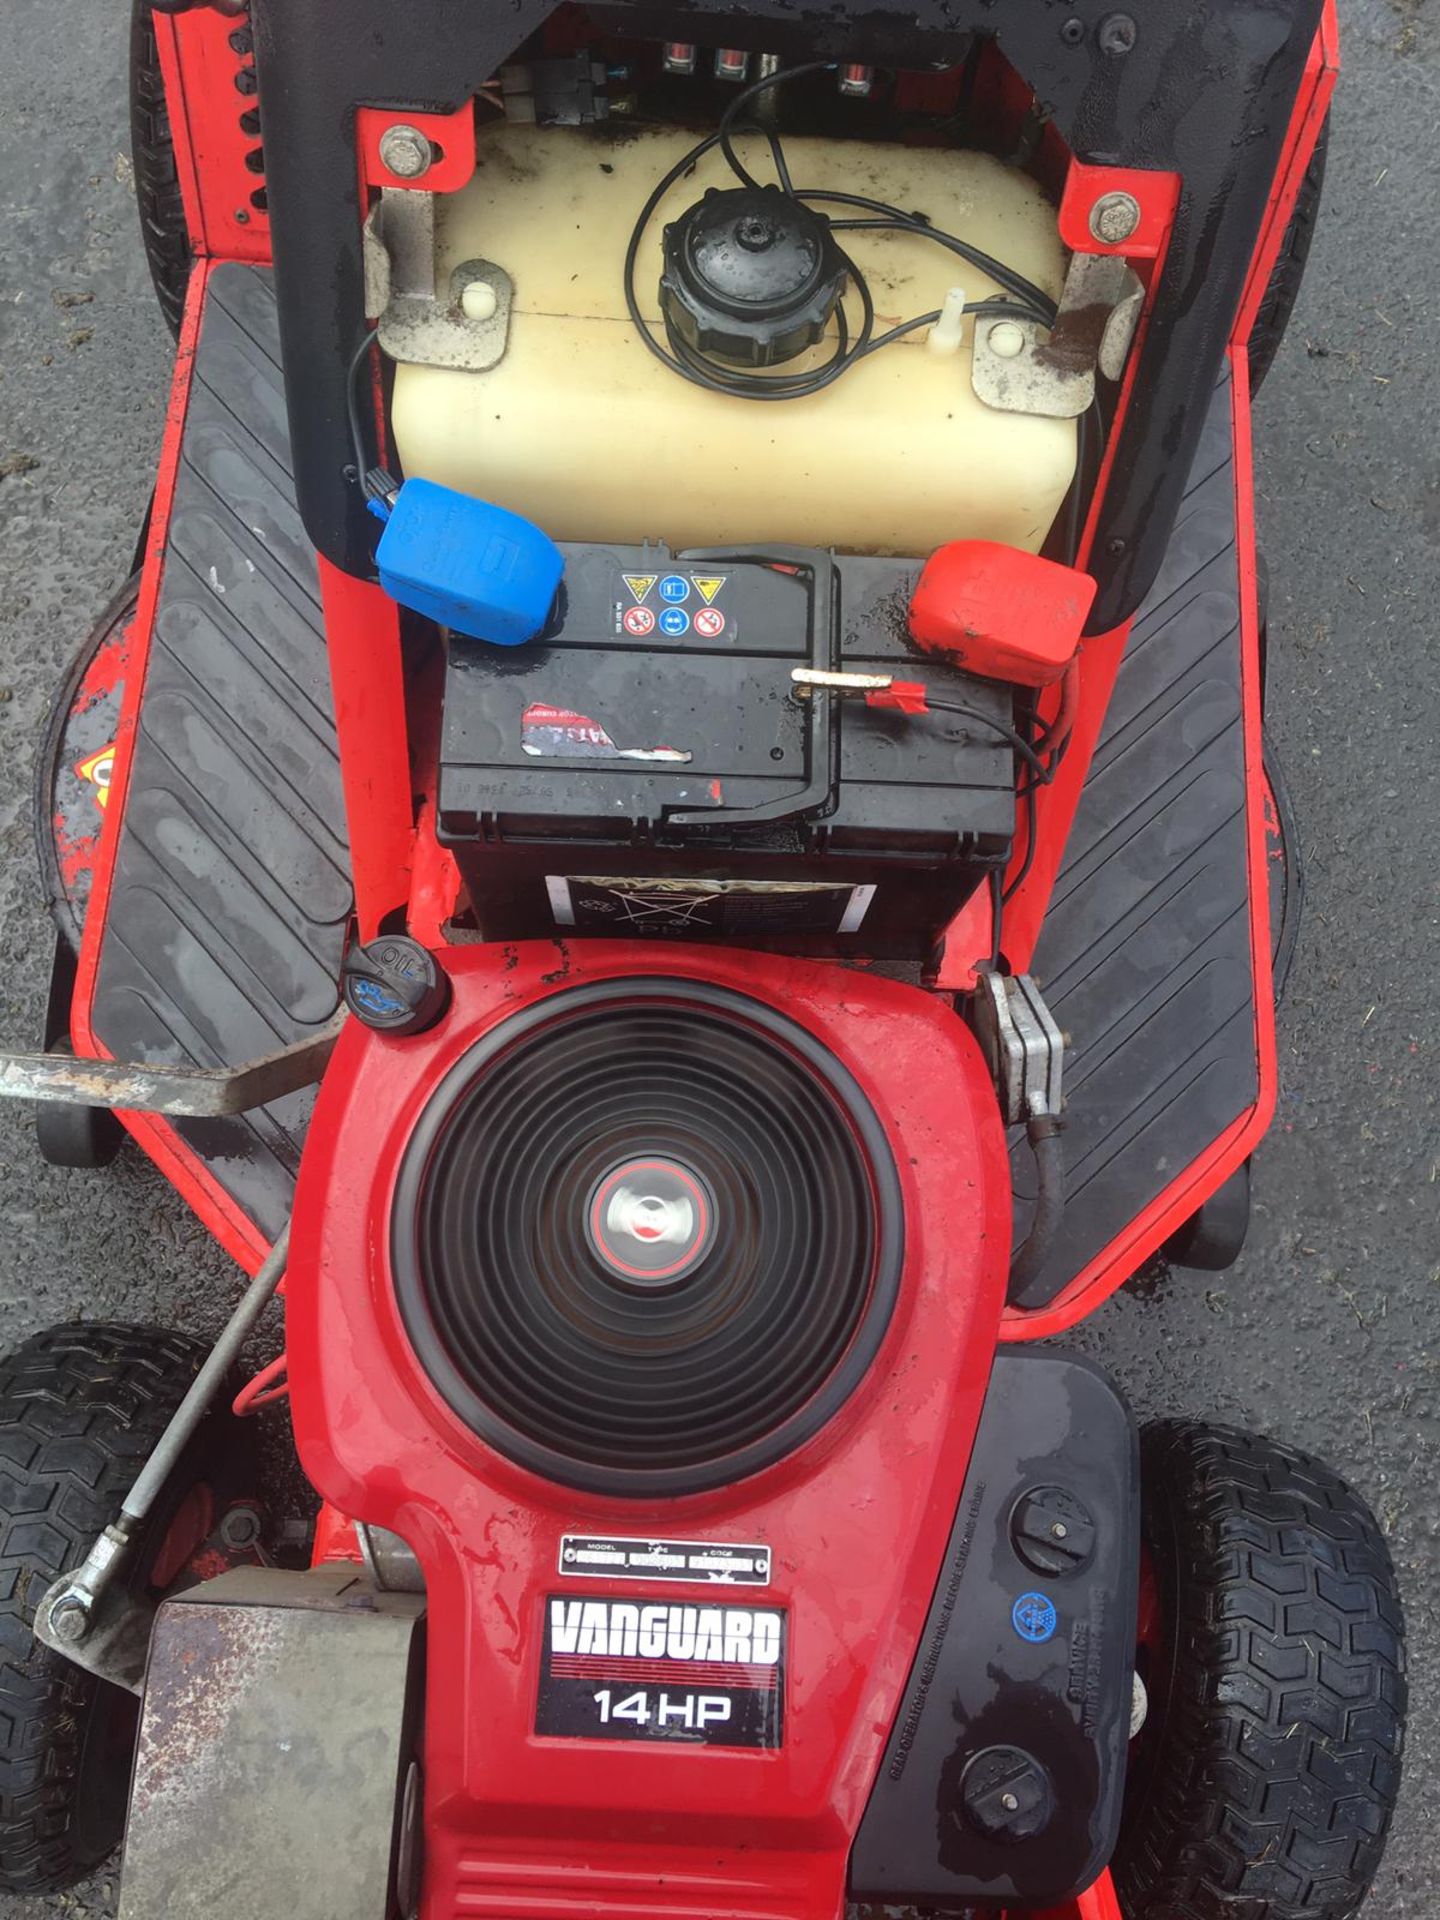 COUNTAX K14 RIDE ON LAWN MOWER, VANGUARD 14HP ENGINE, STARTS, RUNS AND DRIVES *NO VAT* - Image 11 of 12